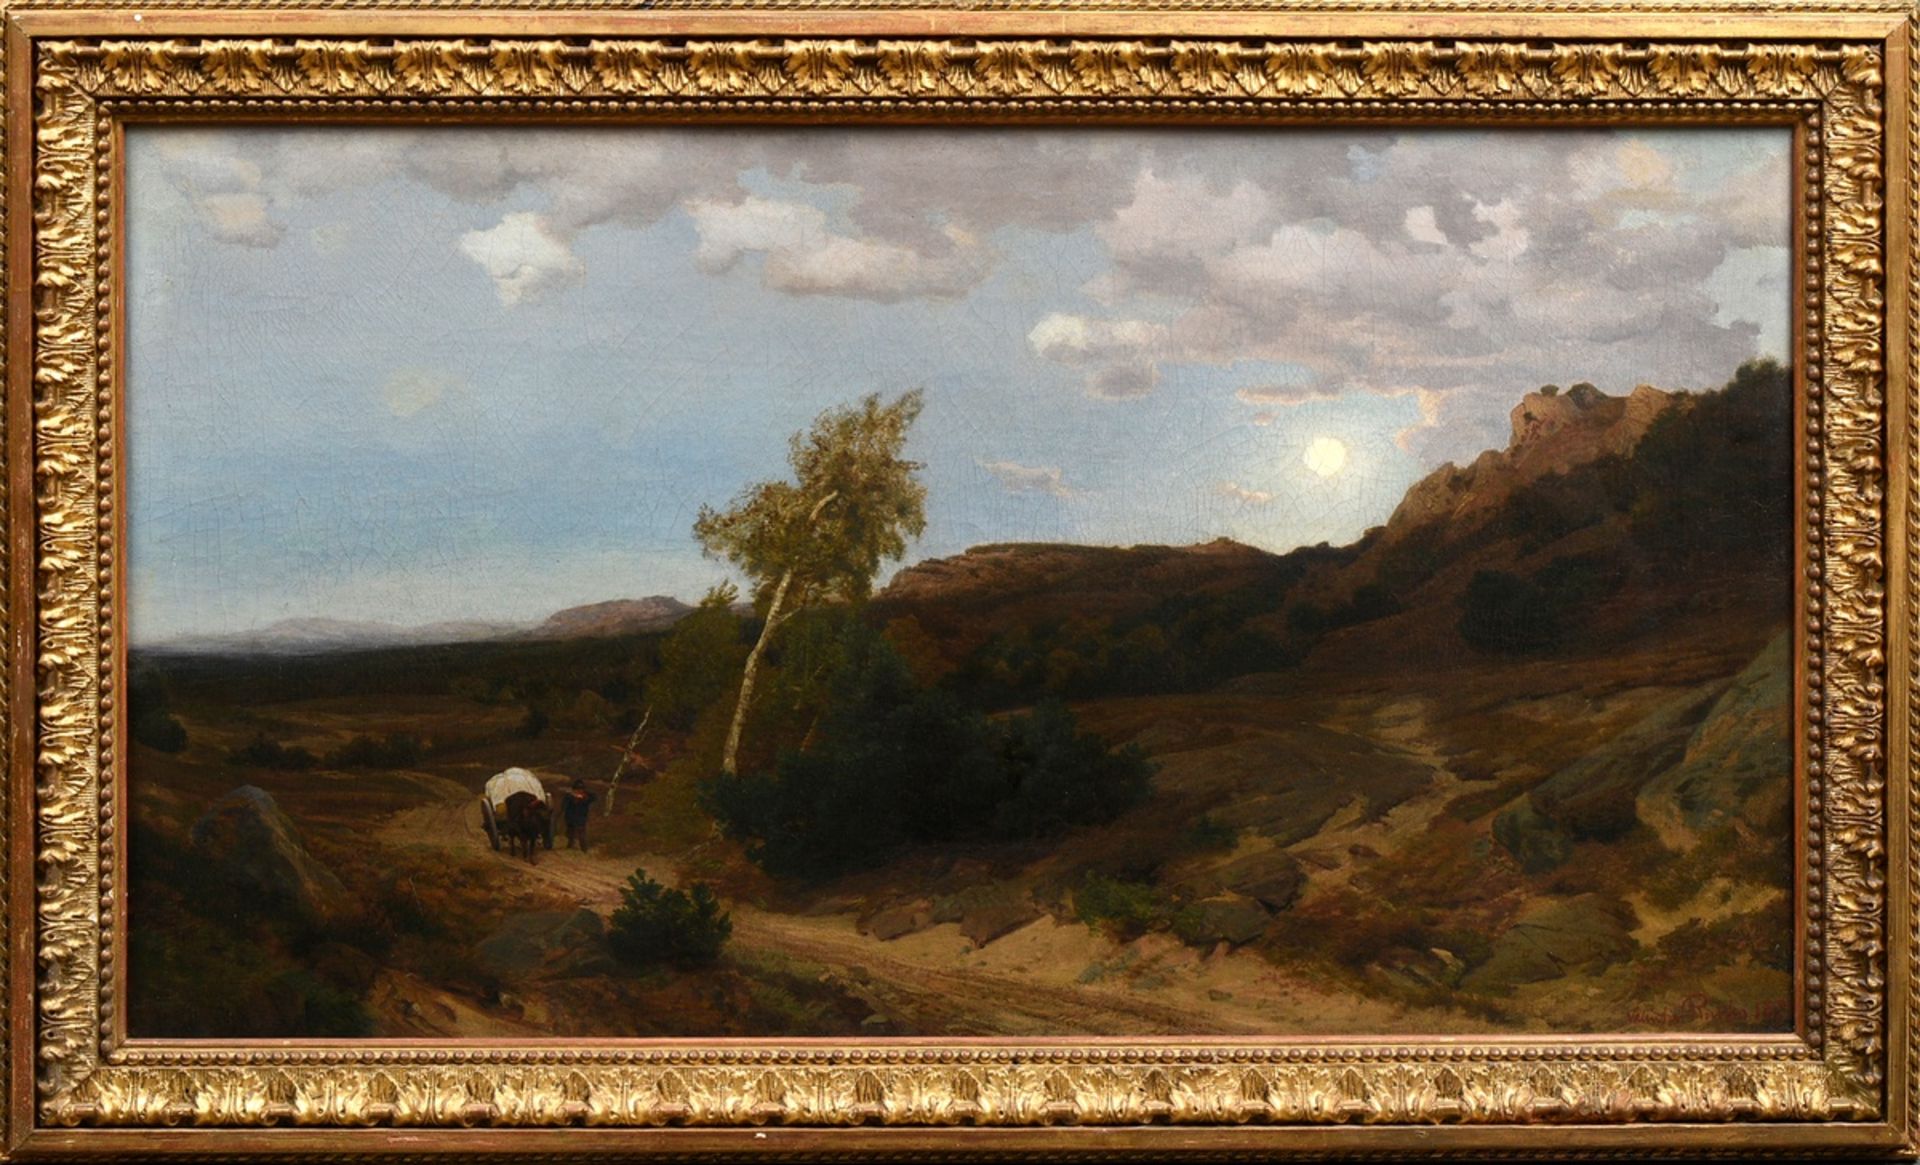 Ruths, Valentin (1825-1905) "Carriage in a moonlit landscape" 1875, oil/canvas, b.r. sign./dat., ma - Image 2 of 11